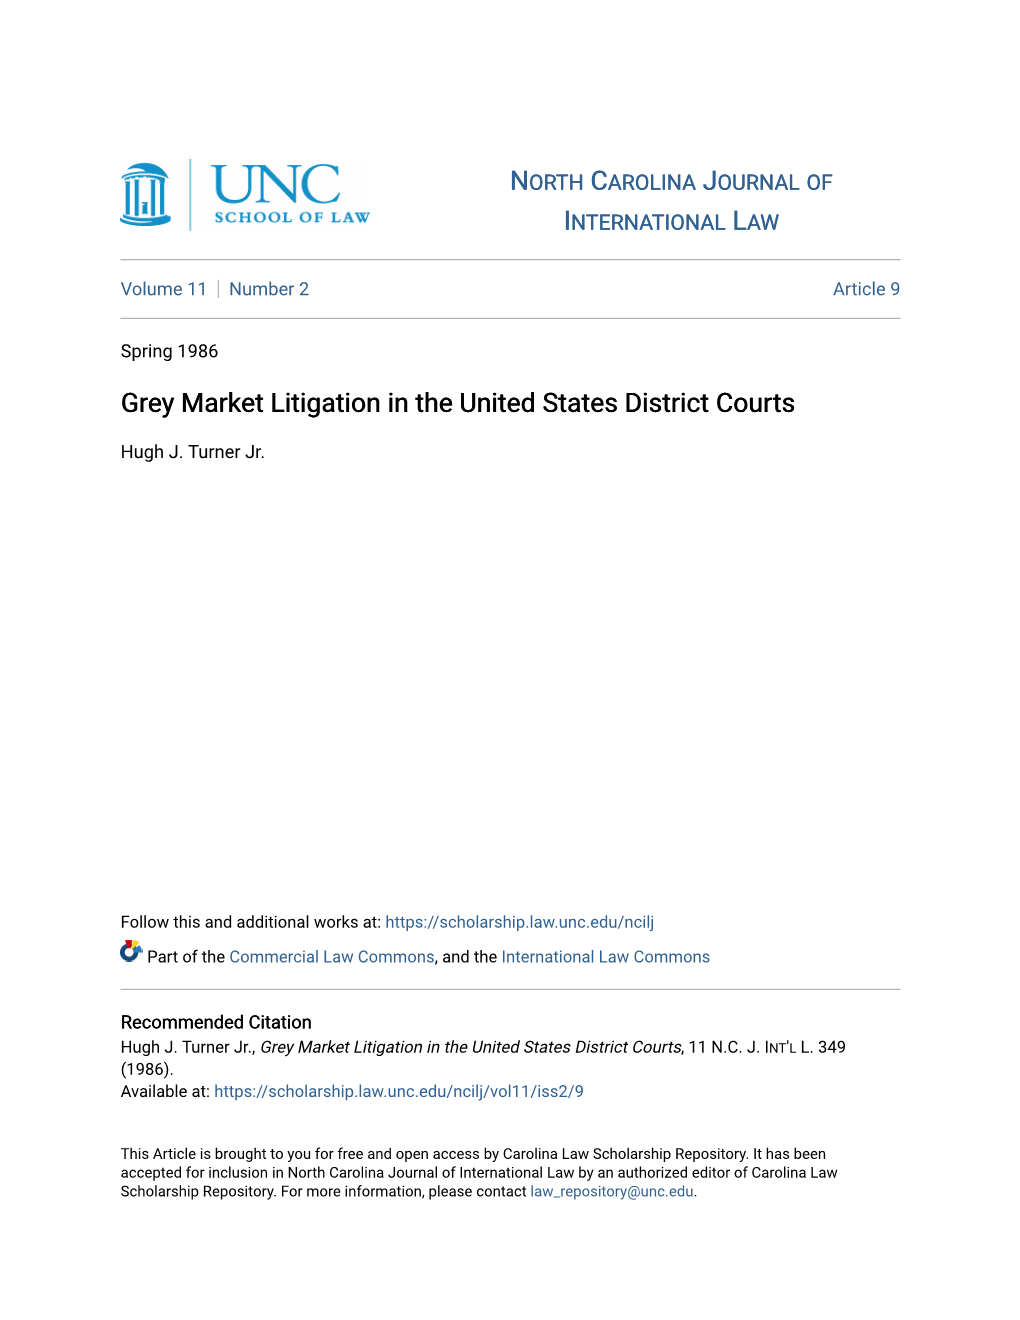 Grey Market Litigation in the United States District Courts